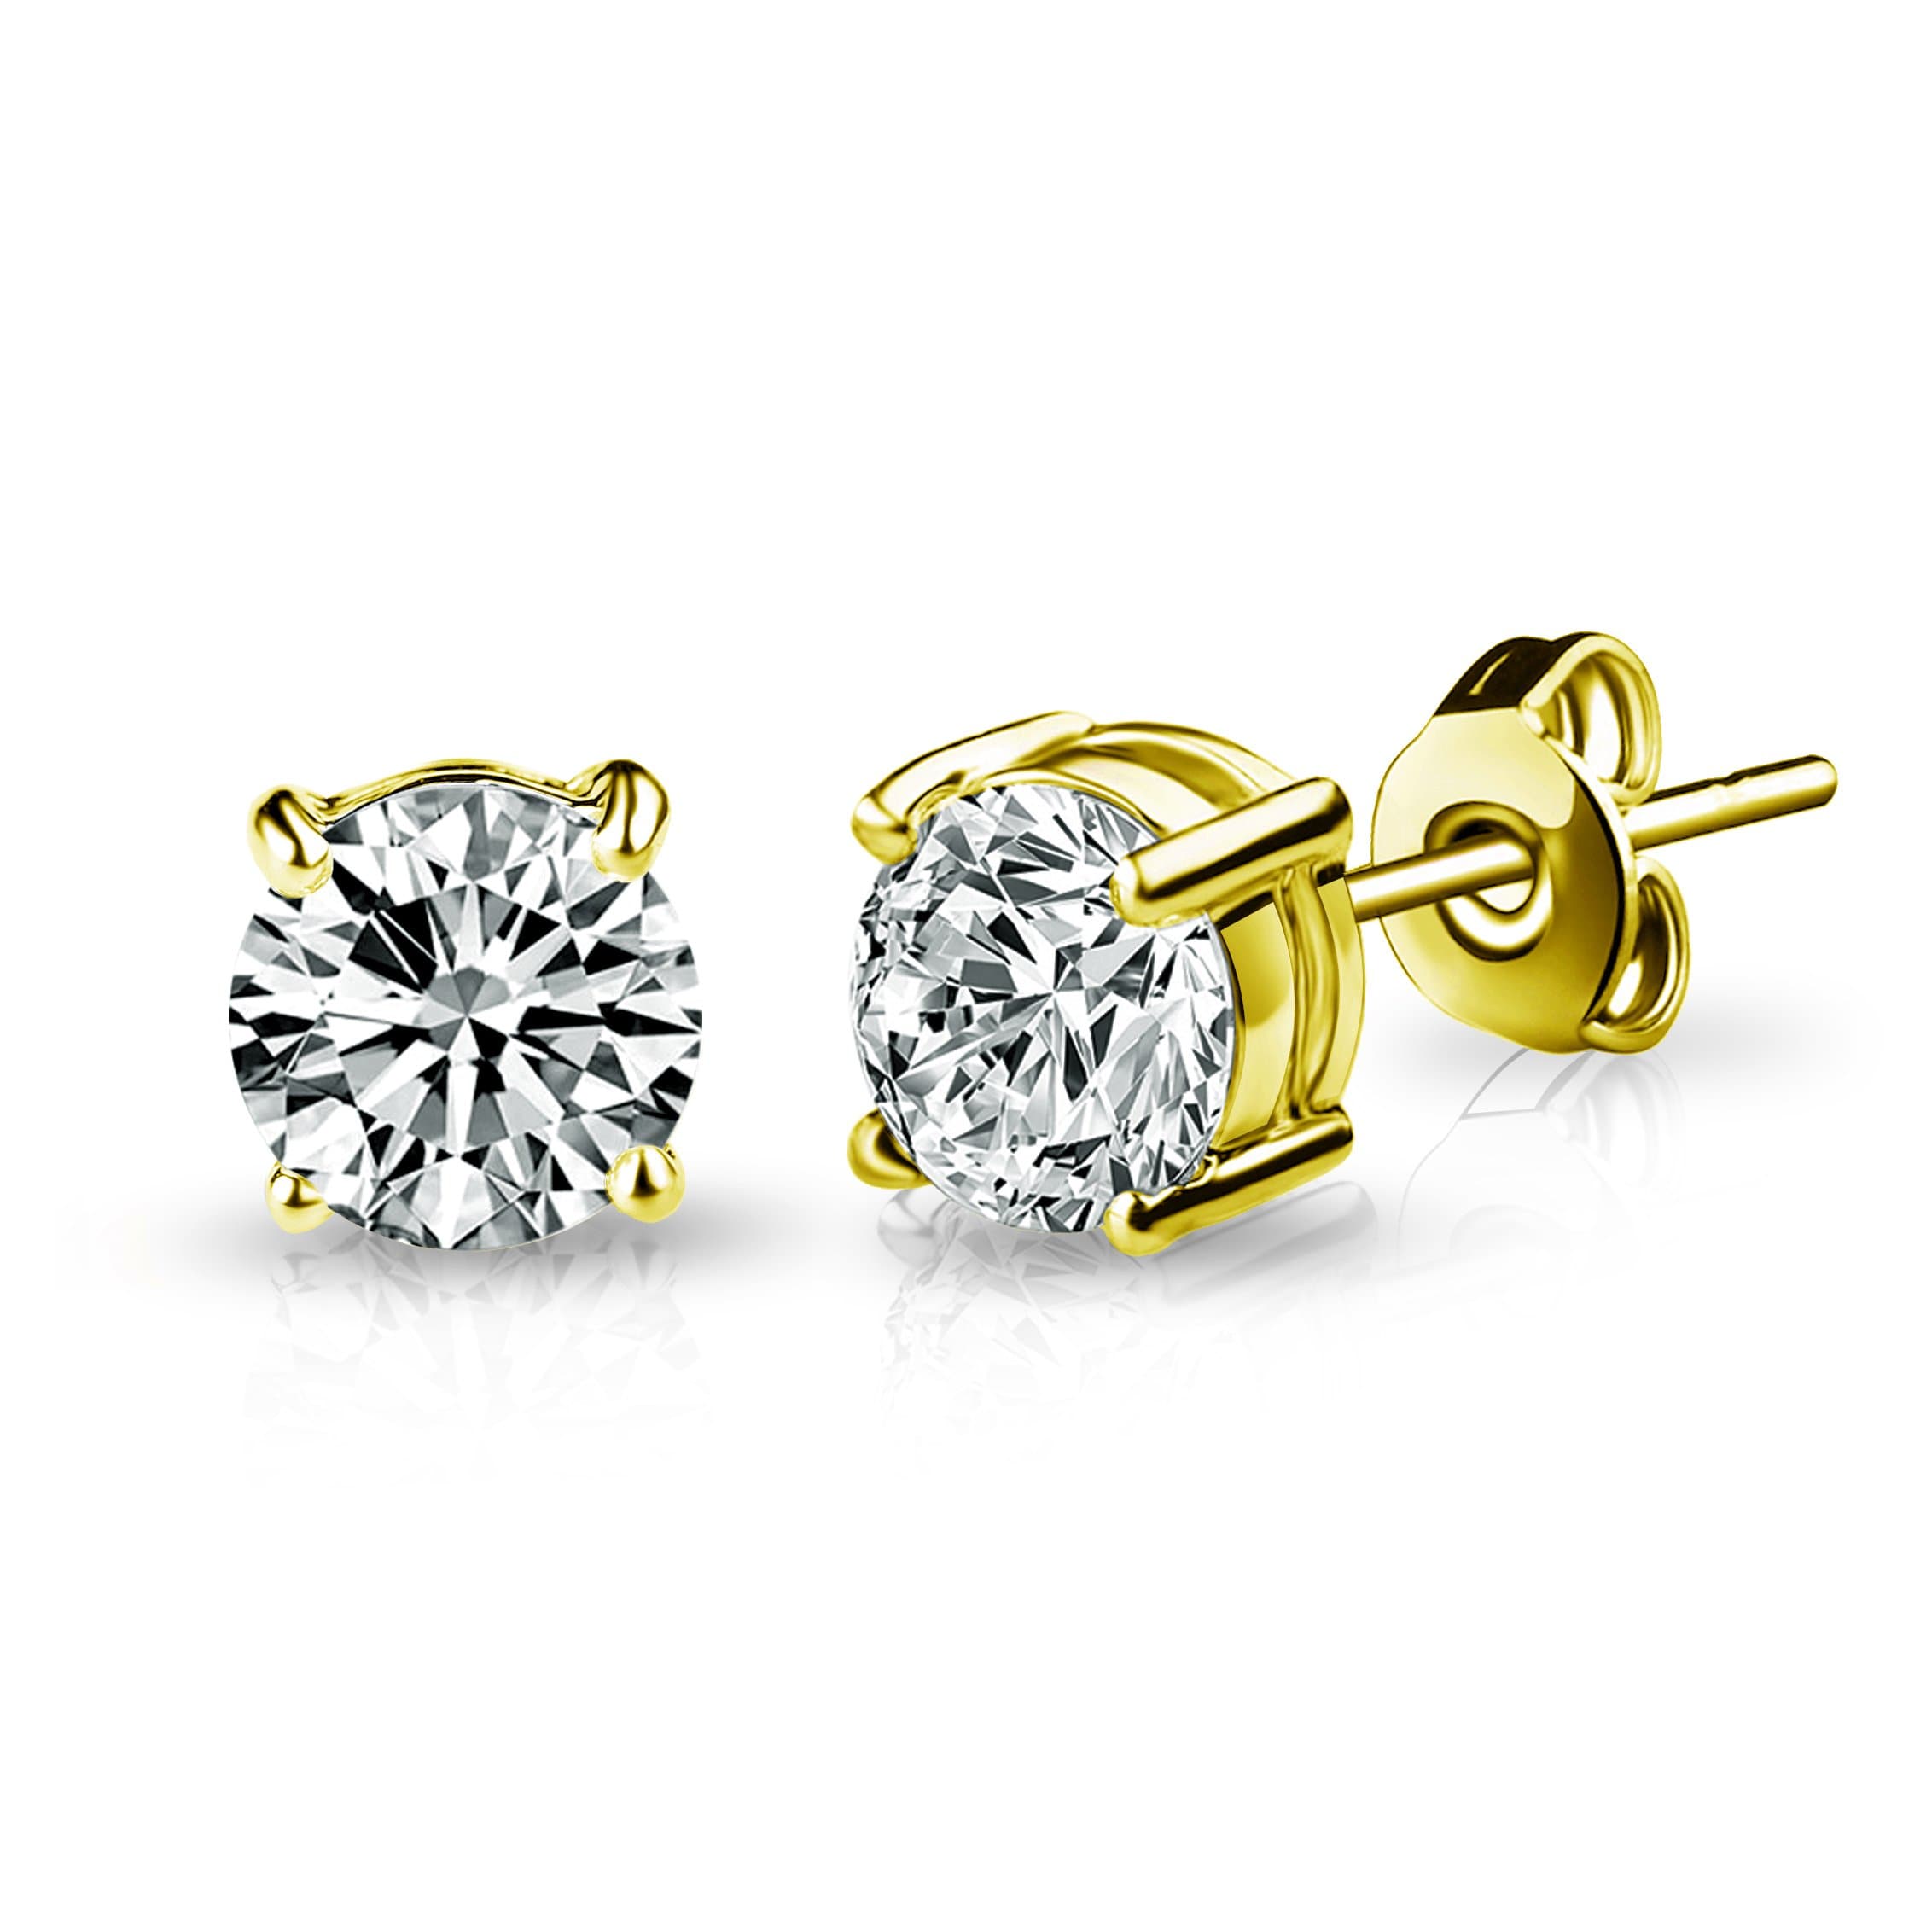 Gold Plated Solitaire Crystal Stud Earrings Created with Zircondia® Crystals by Philip Jones Jewellery